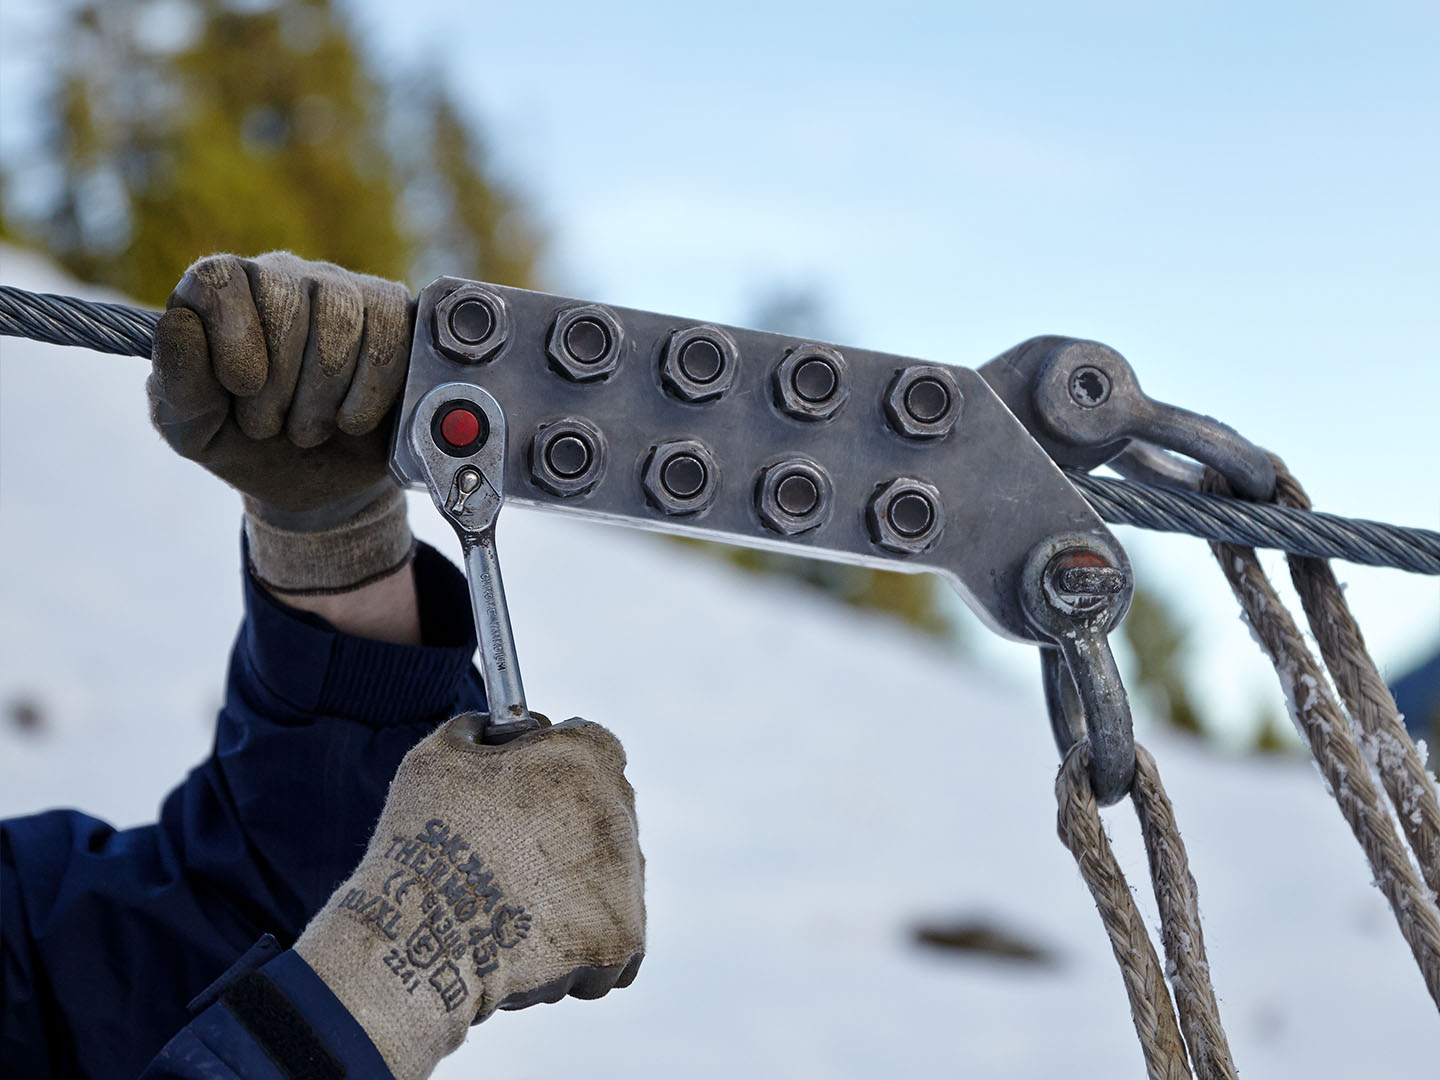 [Translate to Spain (ES), Spanish (Default):] Two hands in gloves of a worker on a snowy mountain adjusting a cable clamp 